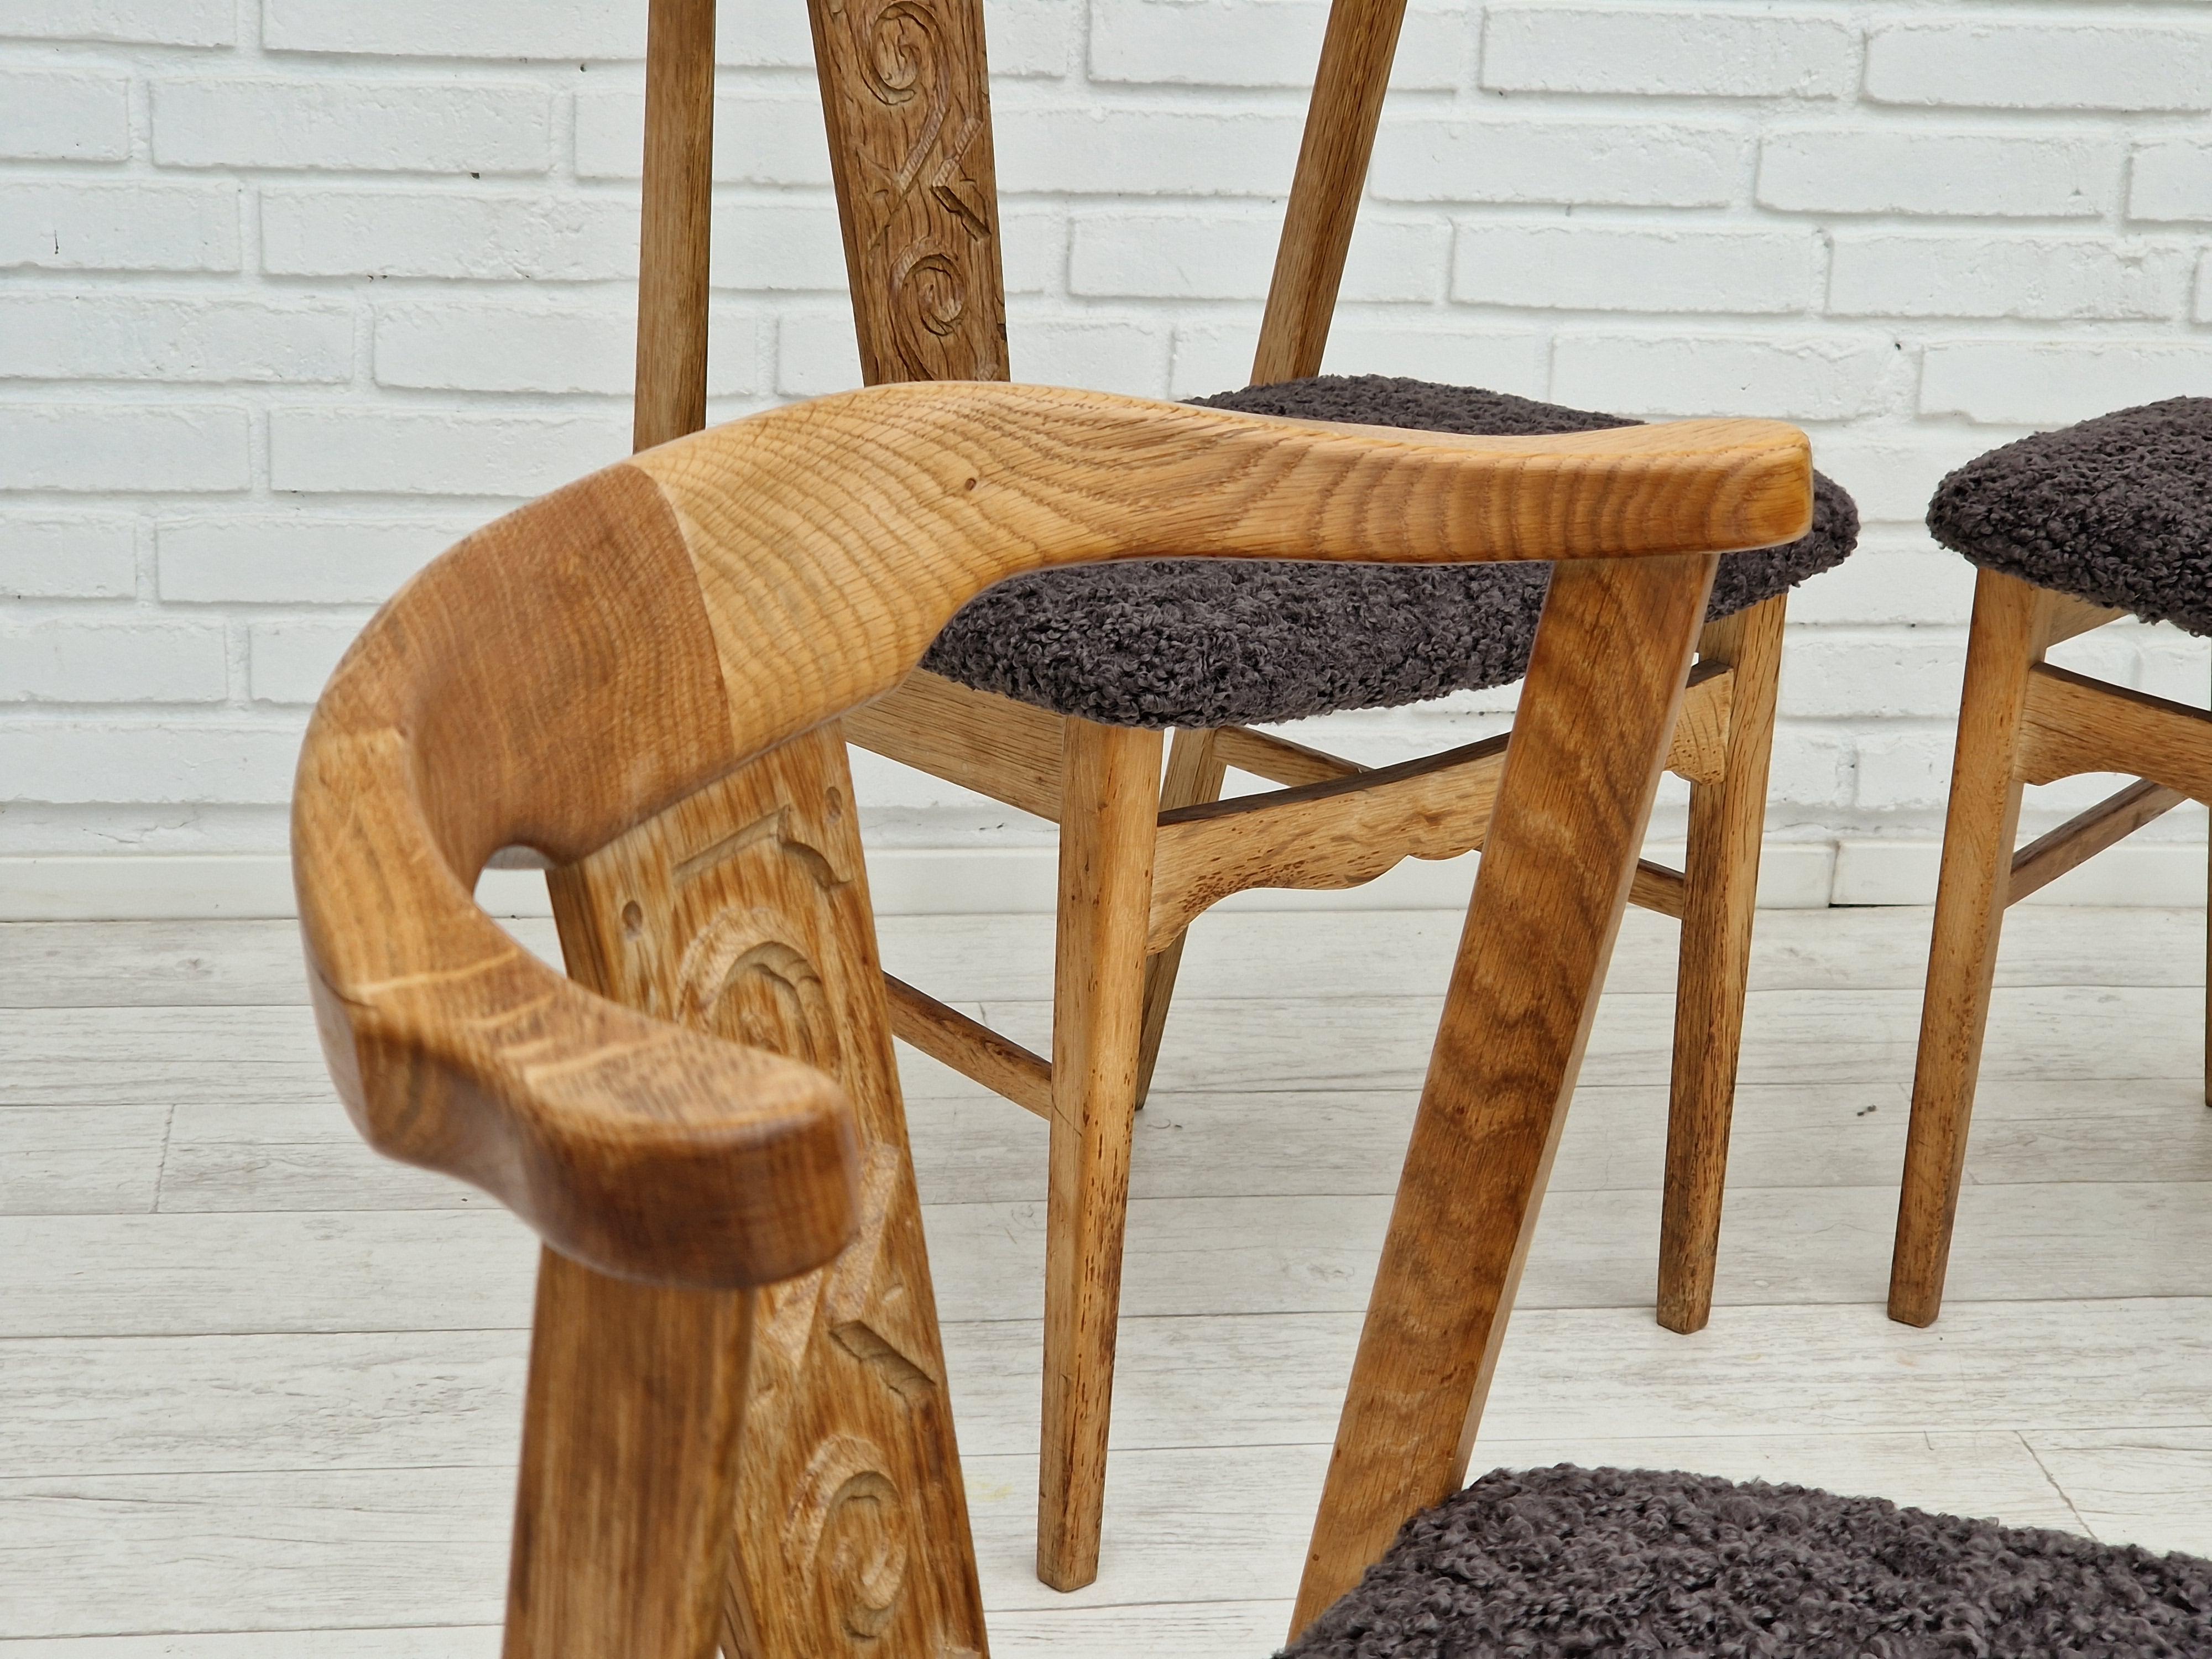 Original Danish design by Henning Kjærnulf from about 1960s. Set of 4 dinning chairs, oak wood, quality grey sheepskin imitation. Reupholstered by professional upholsterer, craftsman. Made by a Danish furniture manufacturer. Wood has no defects and